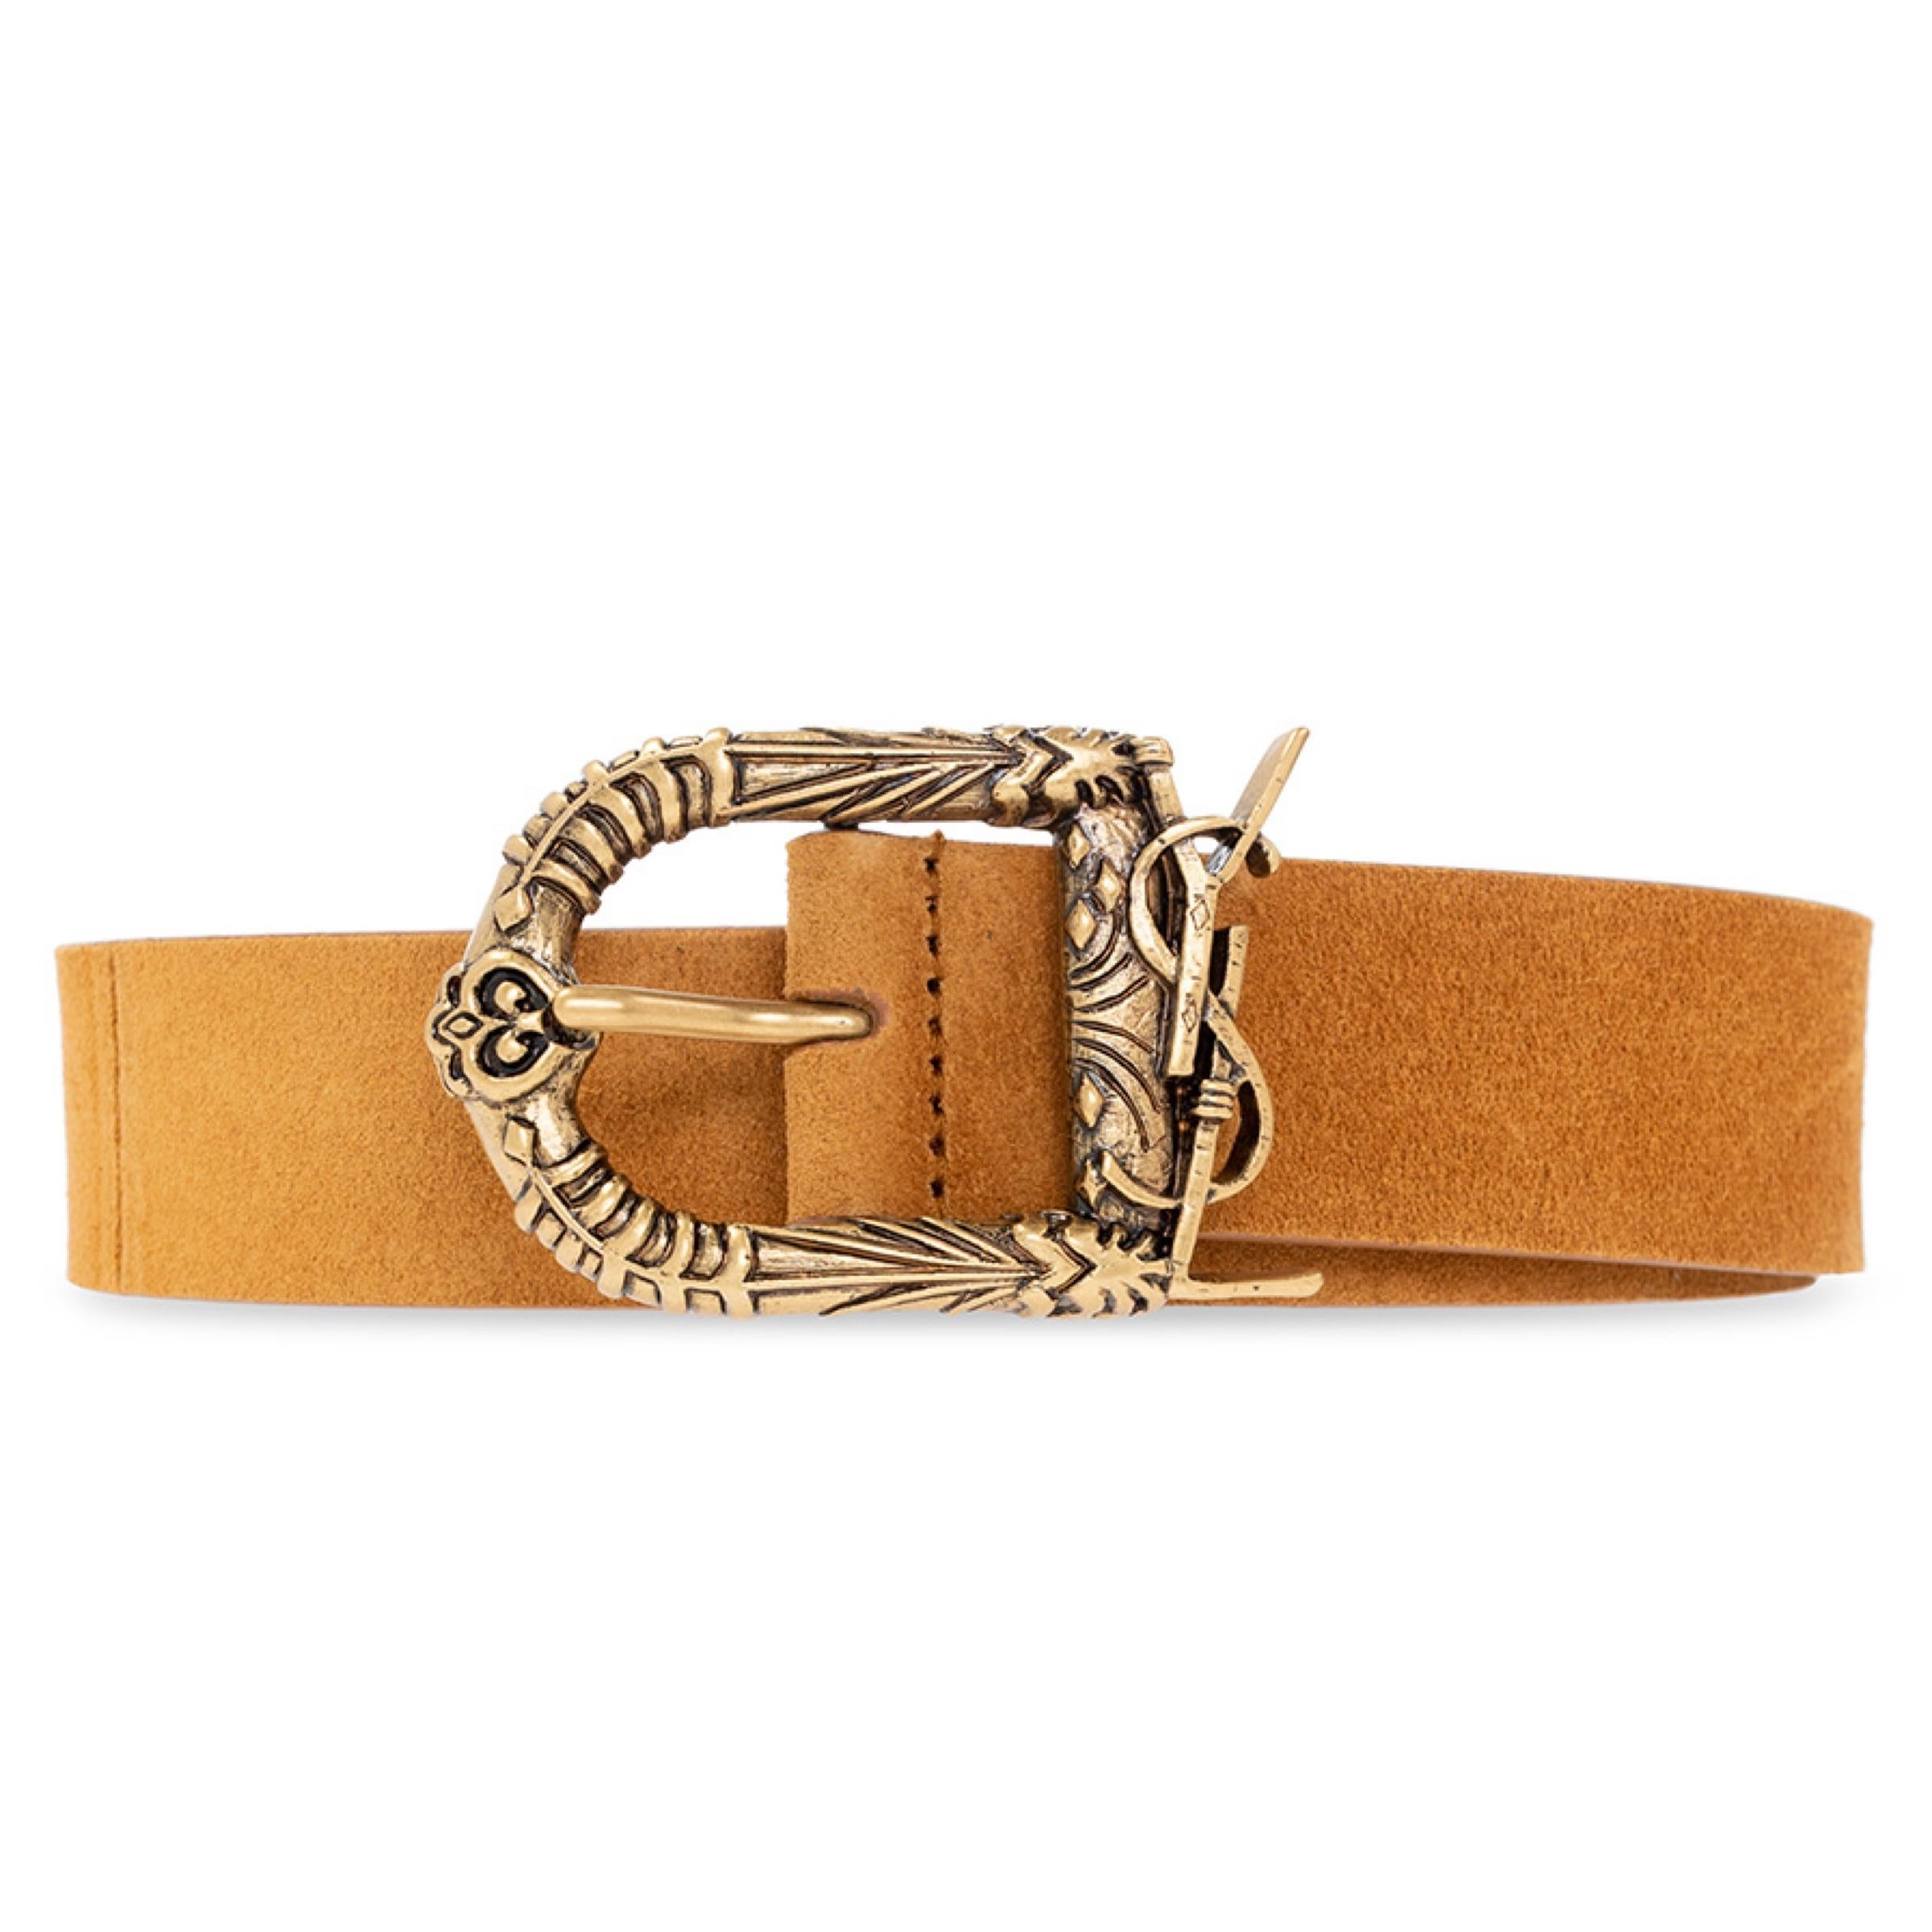 New Saint Laurent Brown Decorative Buckle Leather Belt Size 30 US 75 EU

Authenticity Guaranteed

DETAILS
Brand: Saint Laurent
Condition: Brand new
Gender: Women
Category: Belt
Color: Brown
Material: Leather
Front YSL logo
Decorative buckle
Made in